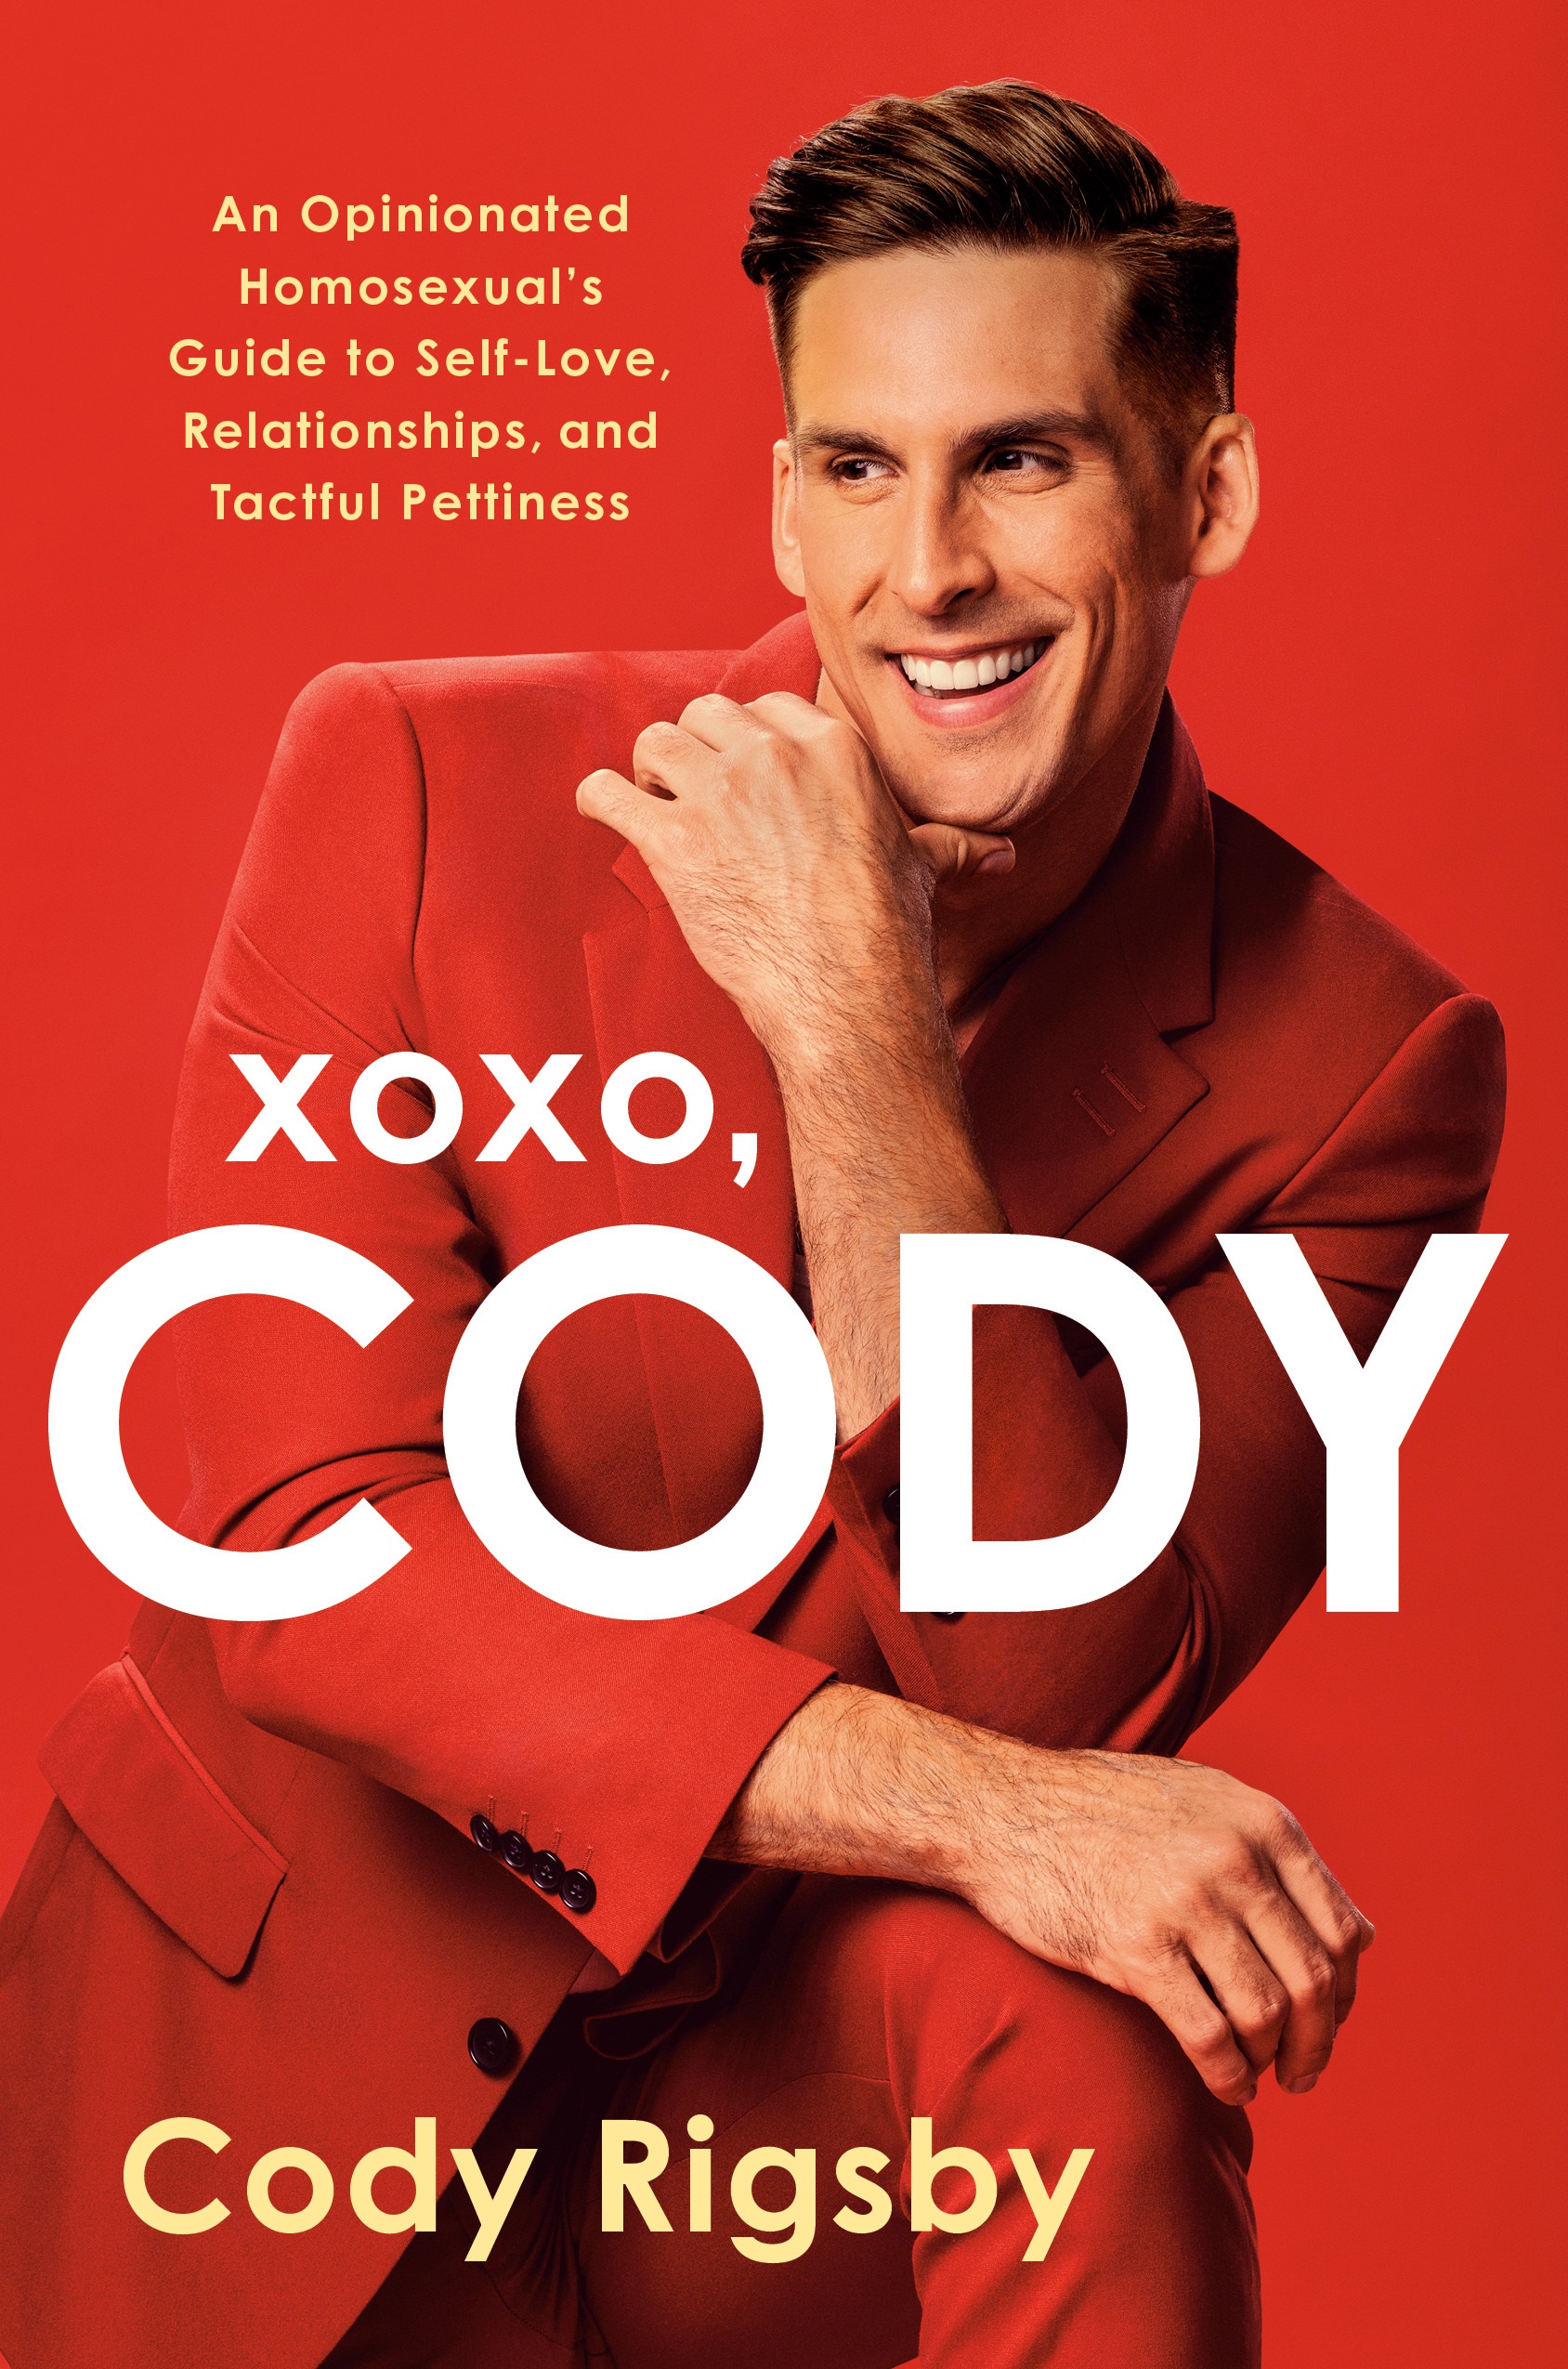 Author Event with Cody Rigsby/XOXO, Cody